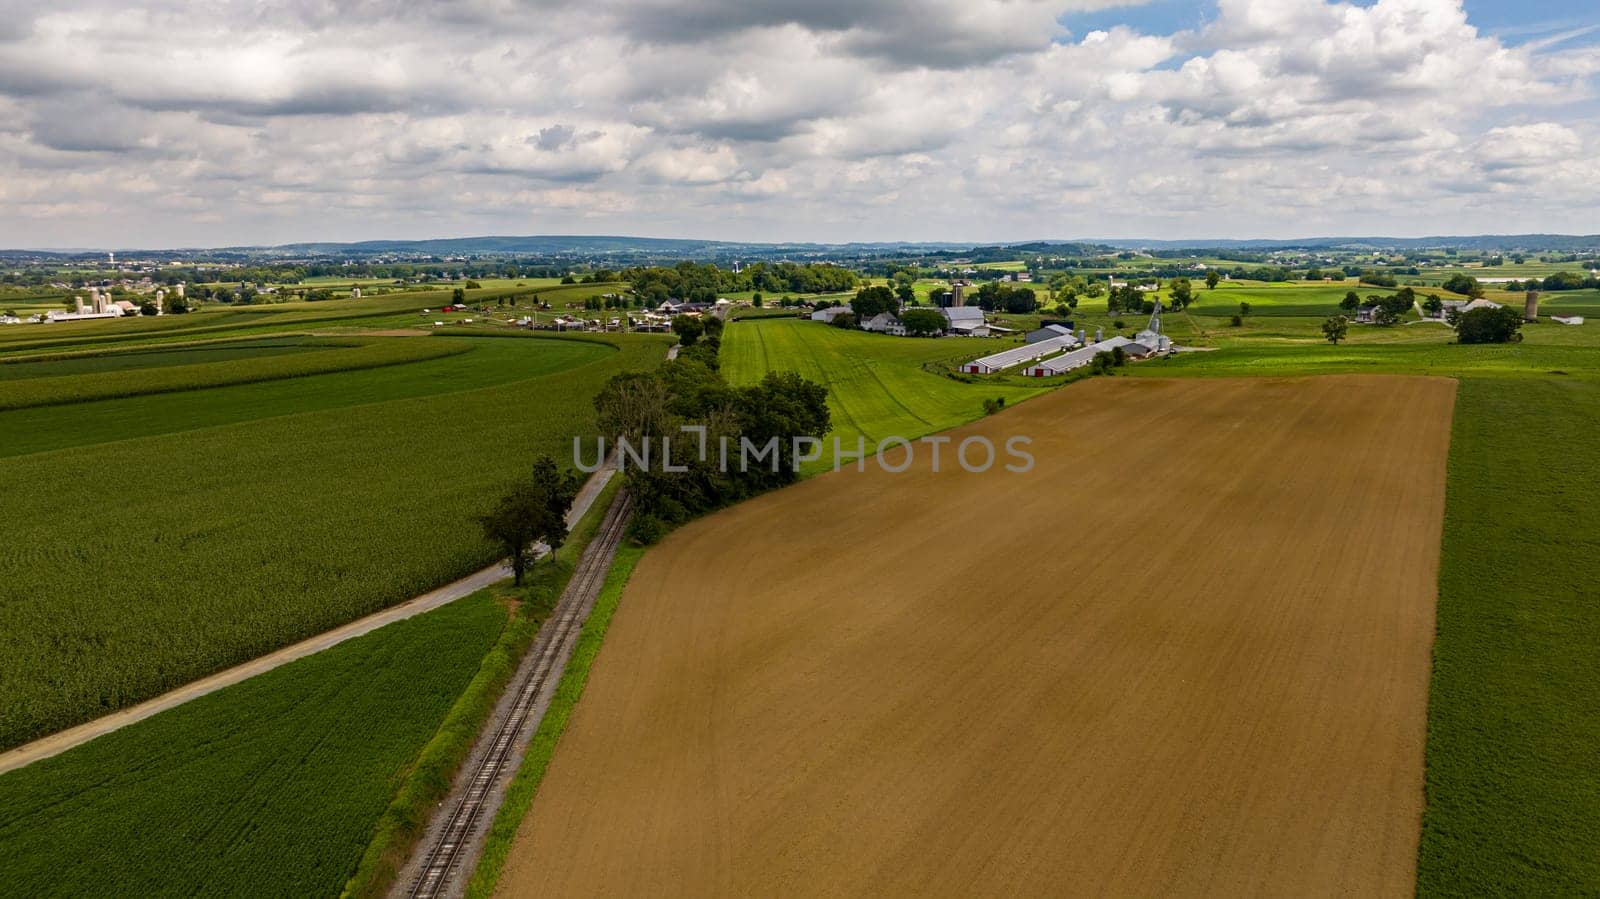 Aerial View of Rural America, with Farmlands and a Single Rail Road Track Going Thru it by actionphoto50